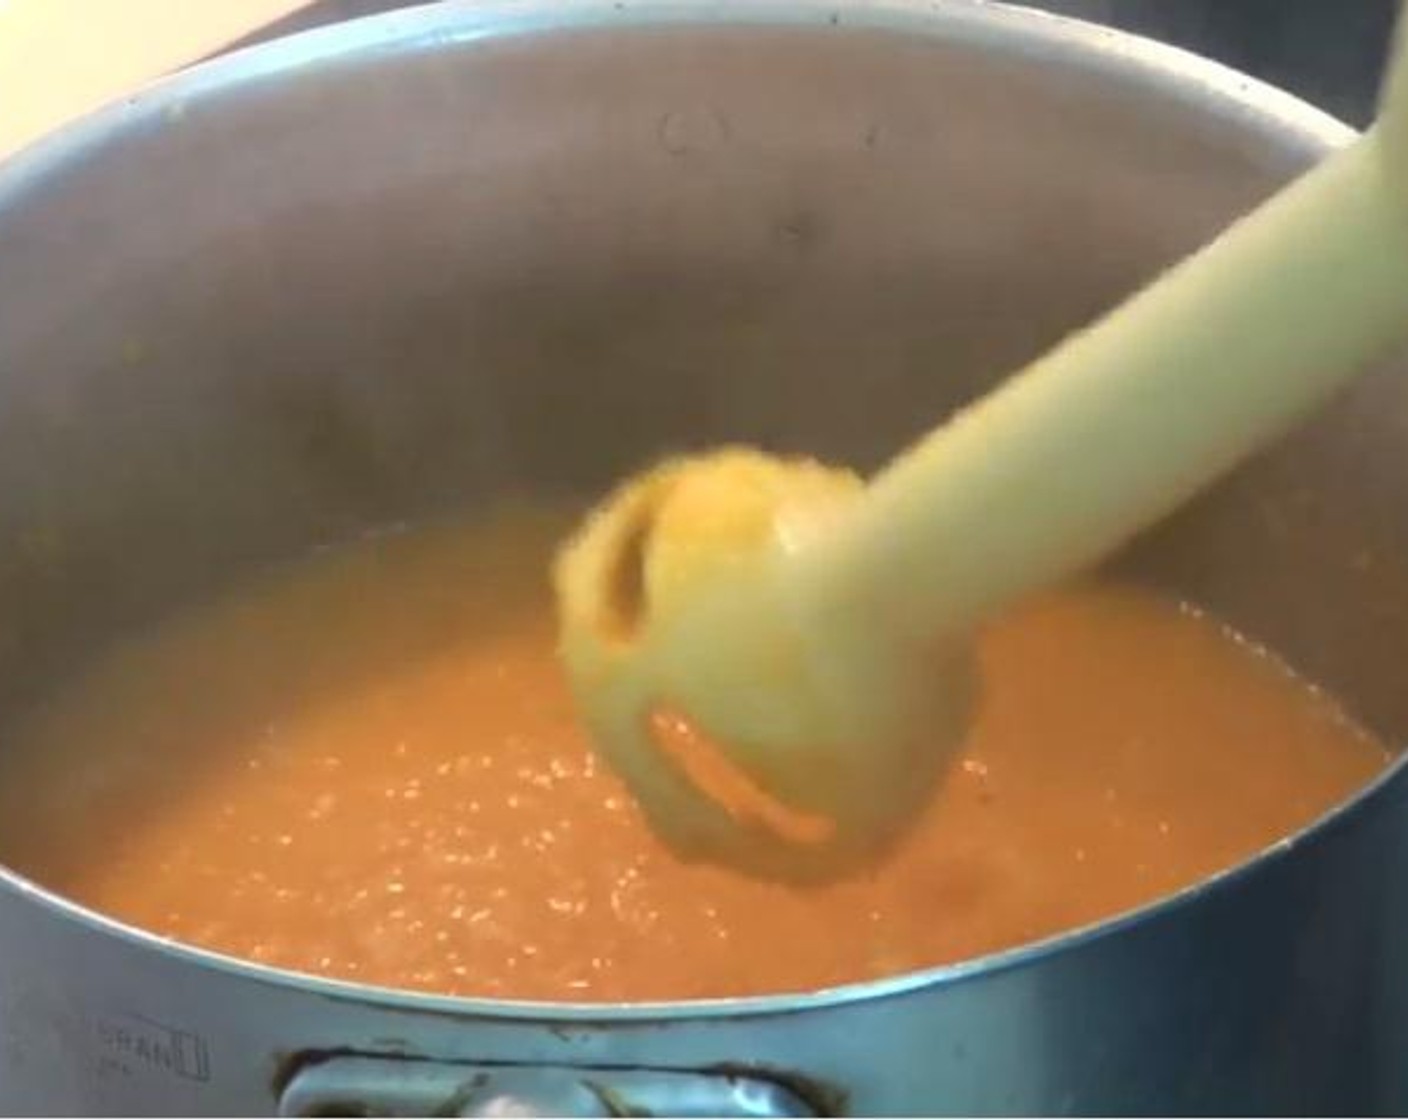 step 3 When the mix comes to boil, Turn the temperature down to low and allow it to simmer for five minutes. Using a stick blender, blend your carrots until they are nice and smooth. Put the lid back on and allow it to simmer for another ten minutes.